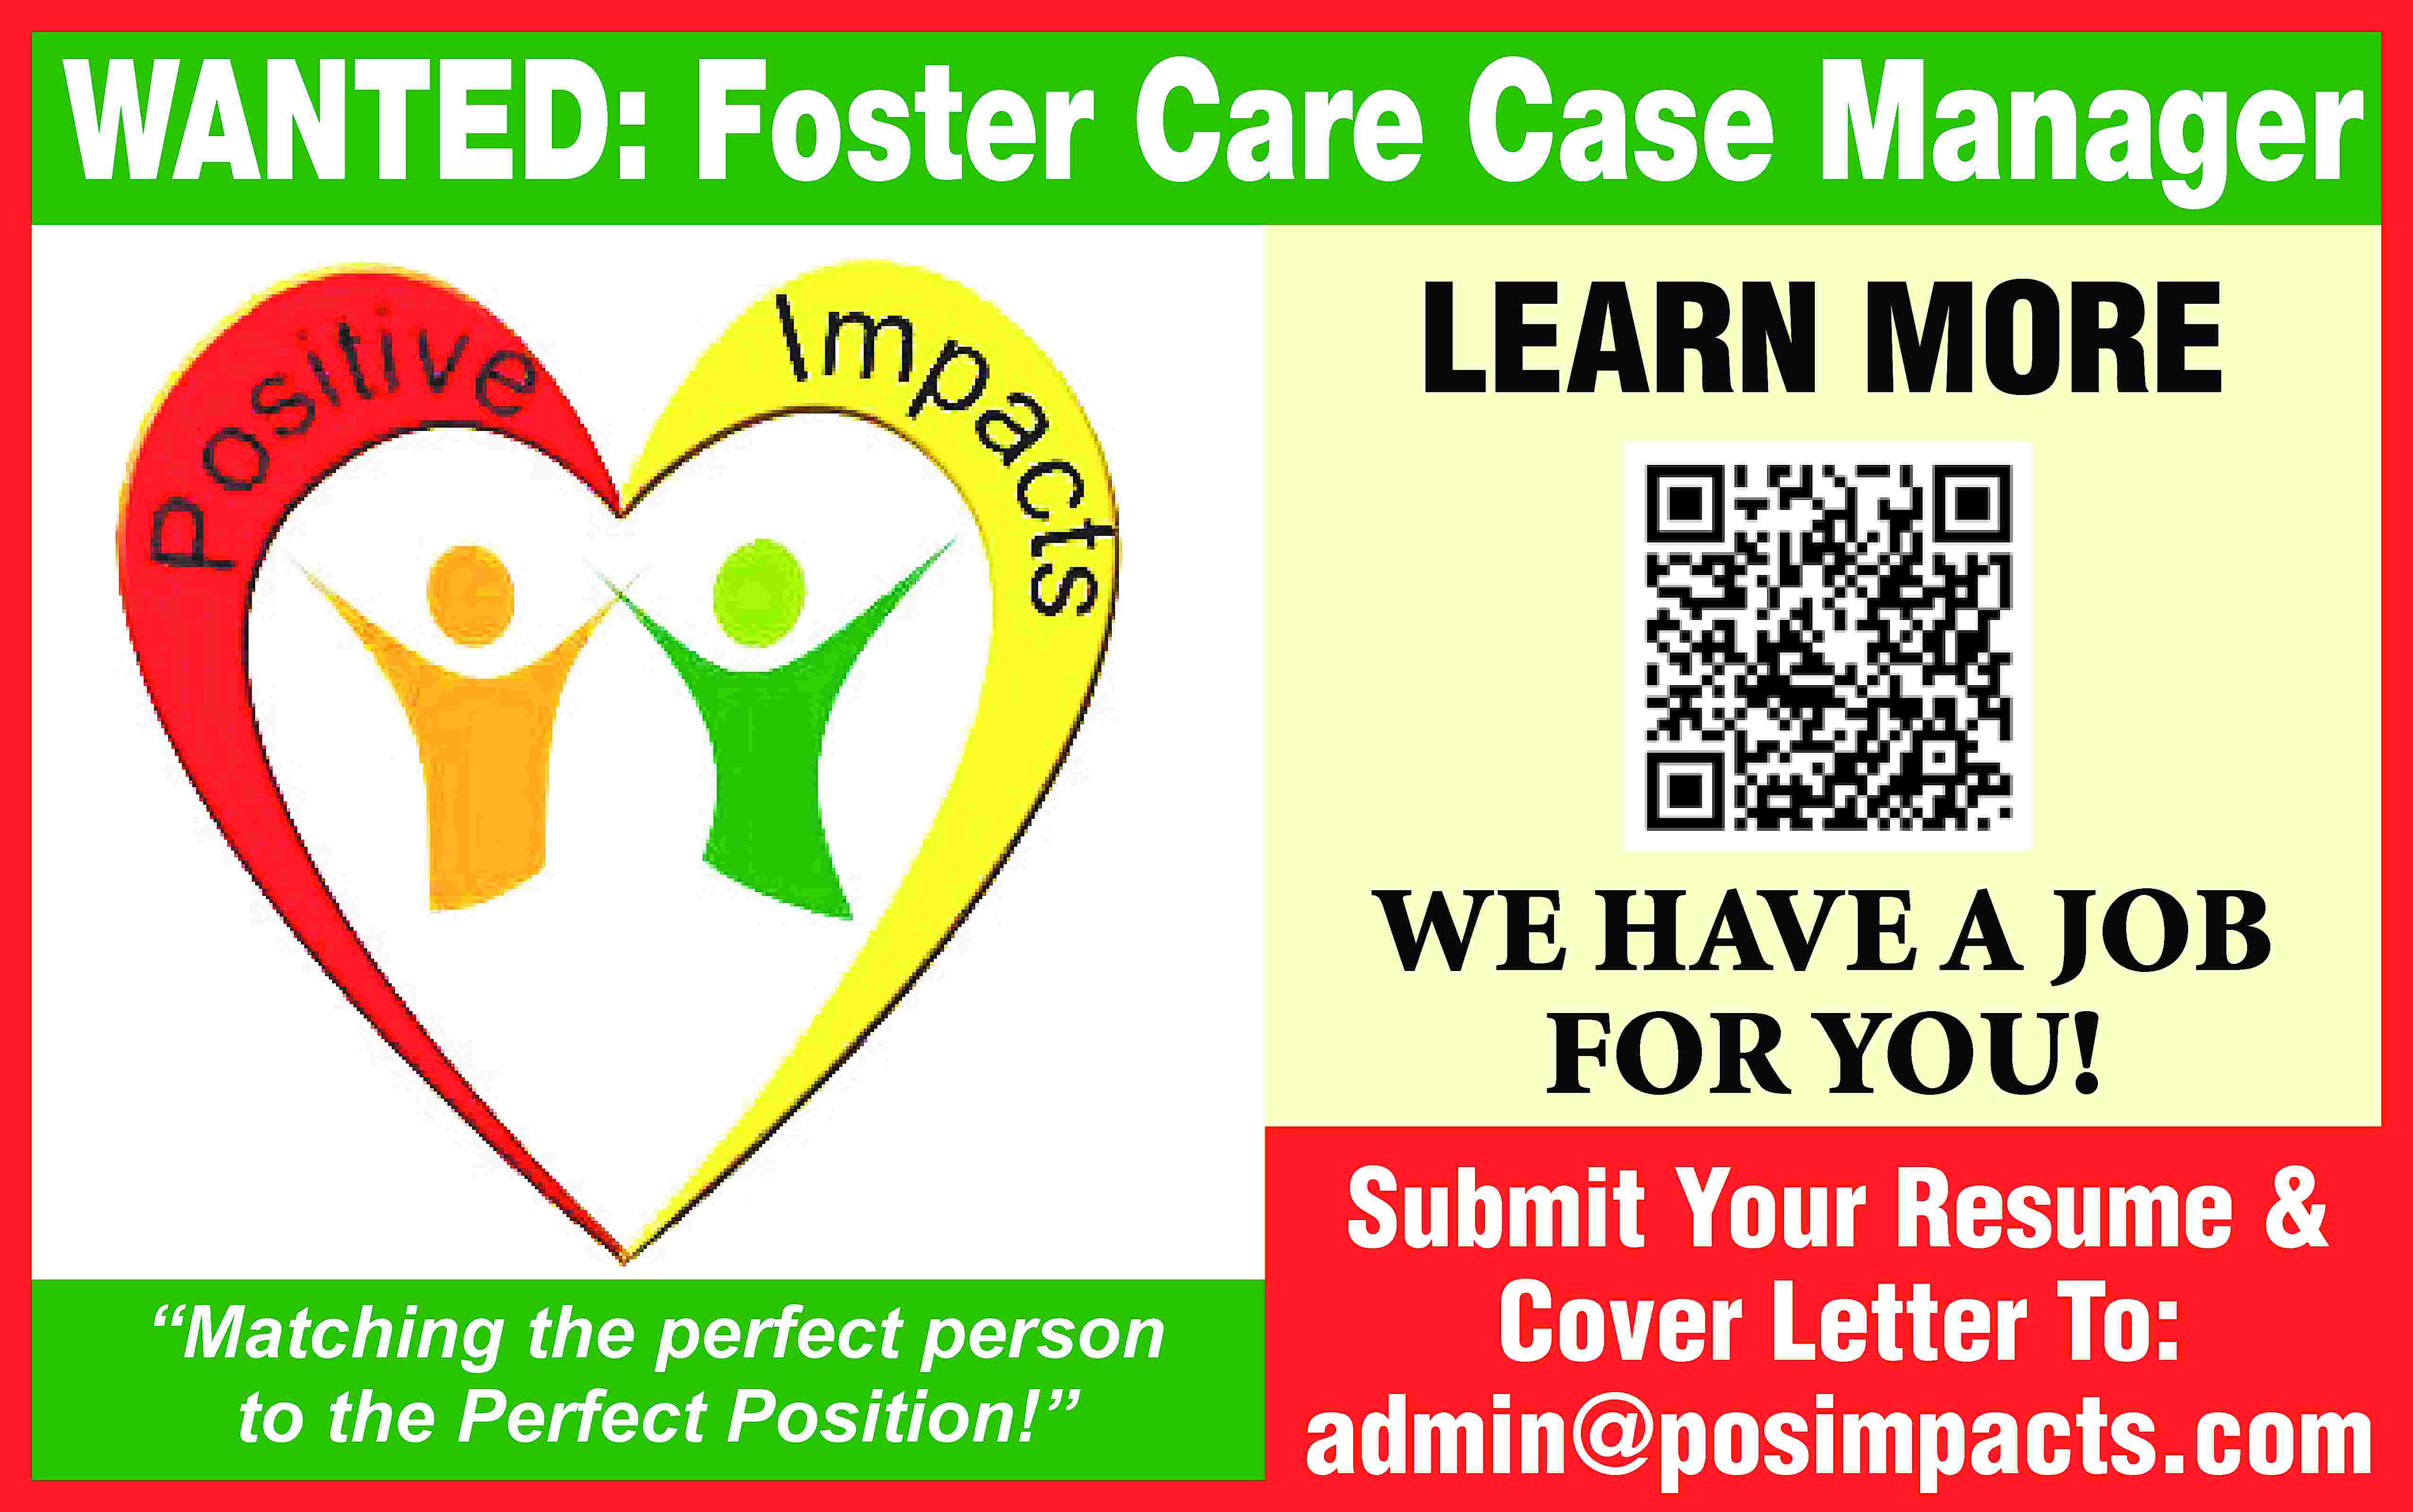 WANTED: Foster Care Case Manager  WANTED: Foster Care Case Manager LEARN MORE WE HAVE A JOB FOR YOU! “Matching the perfect person to the Perfect Position!” Submit Your Resume & Cover Letter To: admin@posimpacts.com